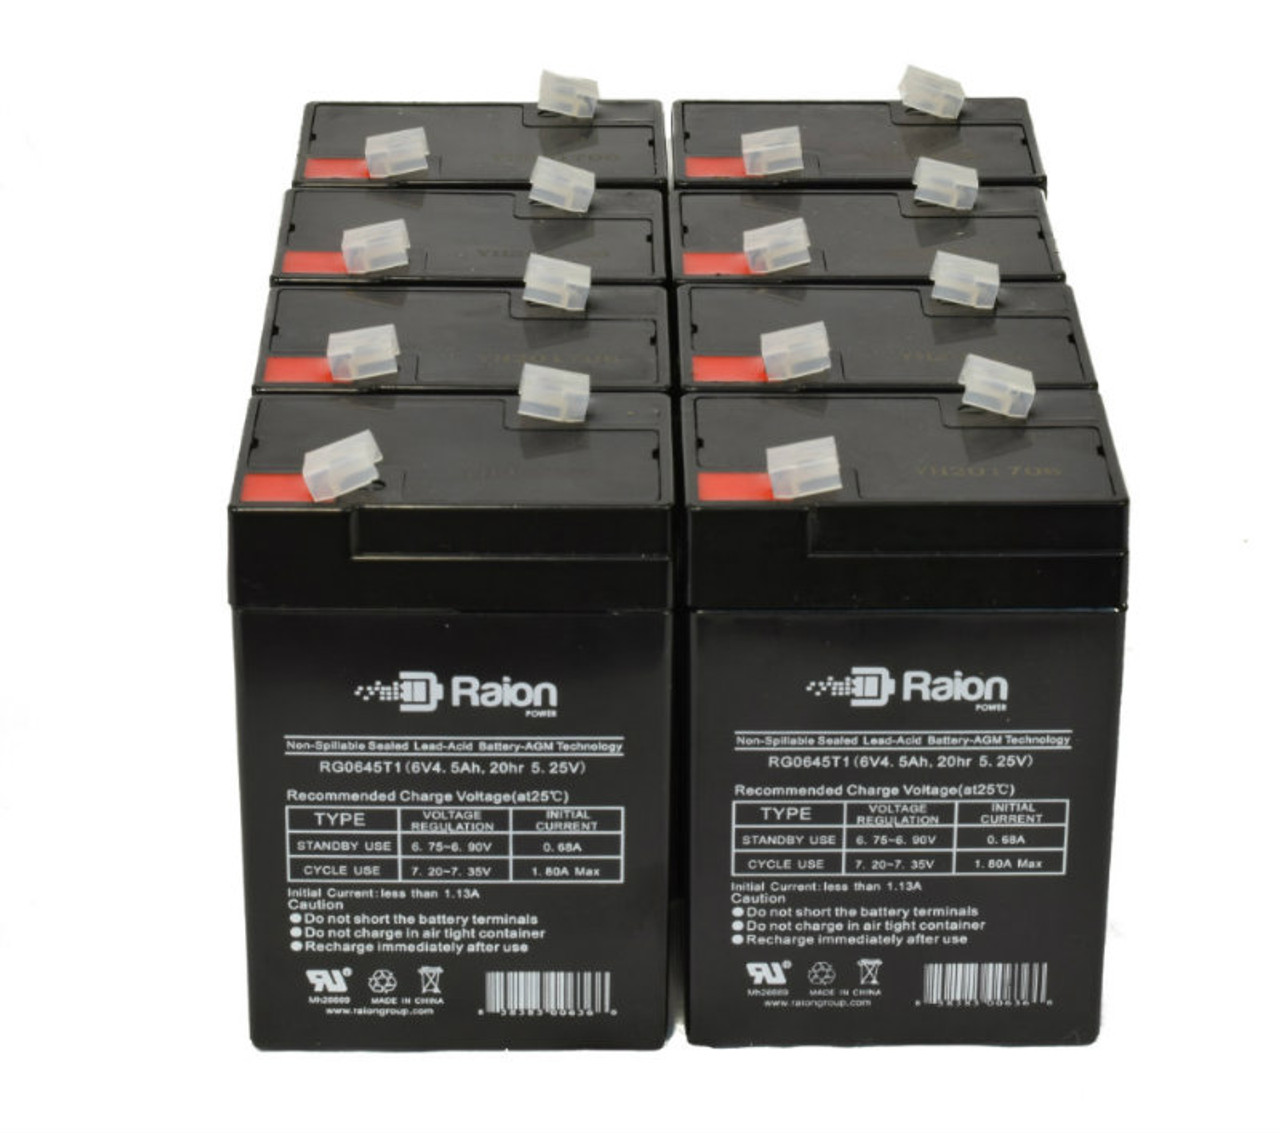 Raion Power RG0645T1 6V 4.5Ah Replacement Medical Equipment Battery for Alaris Medical 4510 Vital Check Monitor - 8 Pack